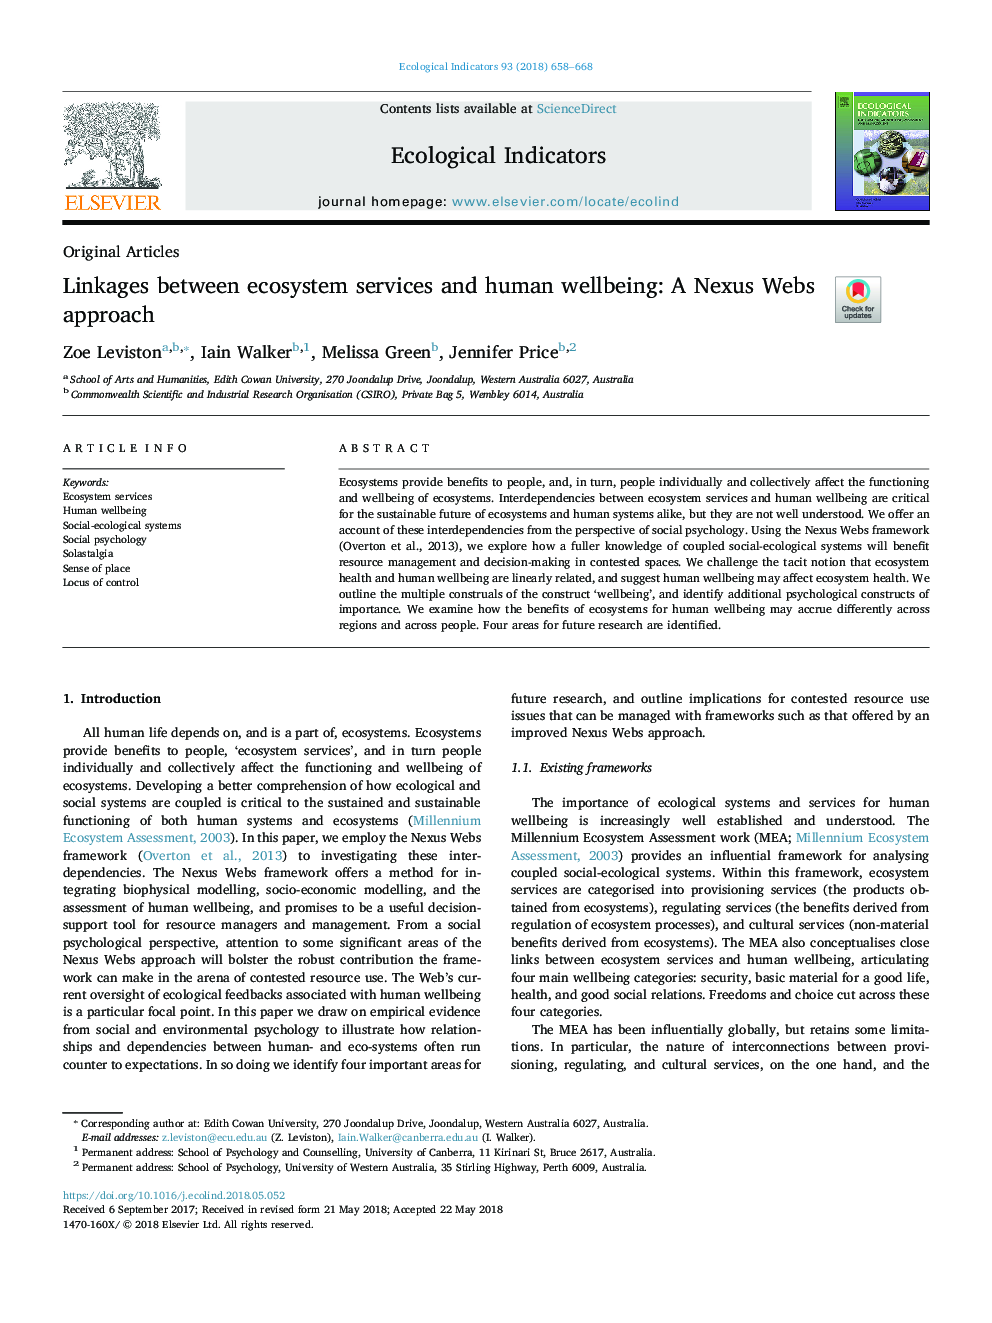 Linkages between ecosystem services and human wellbeing: A Nexus Webs approach